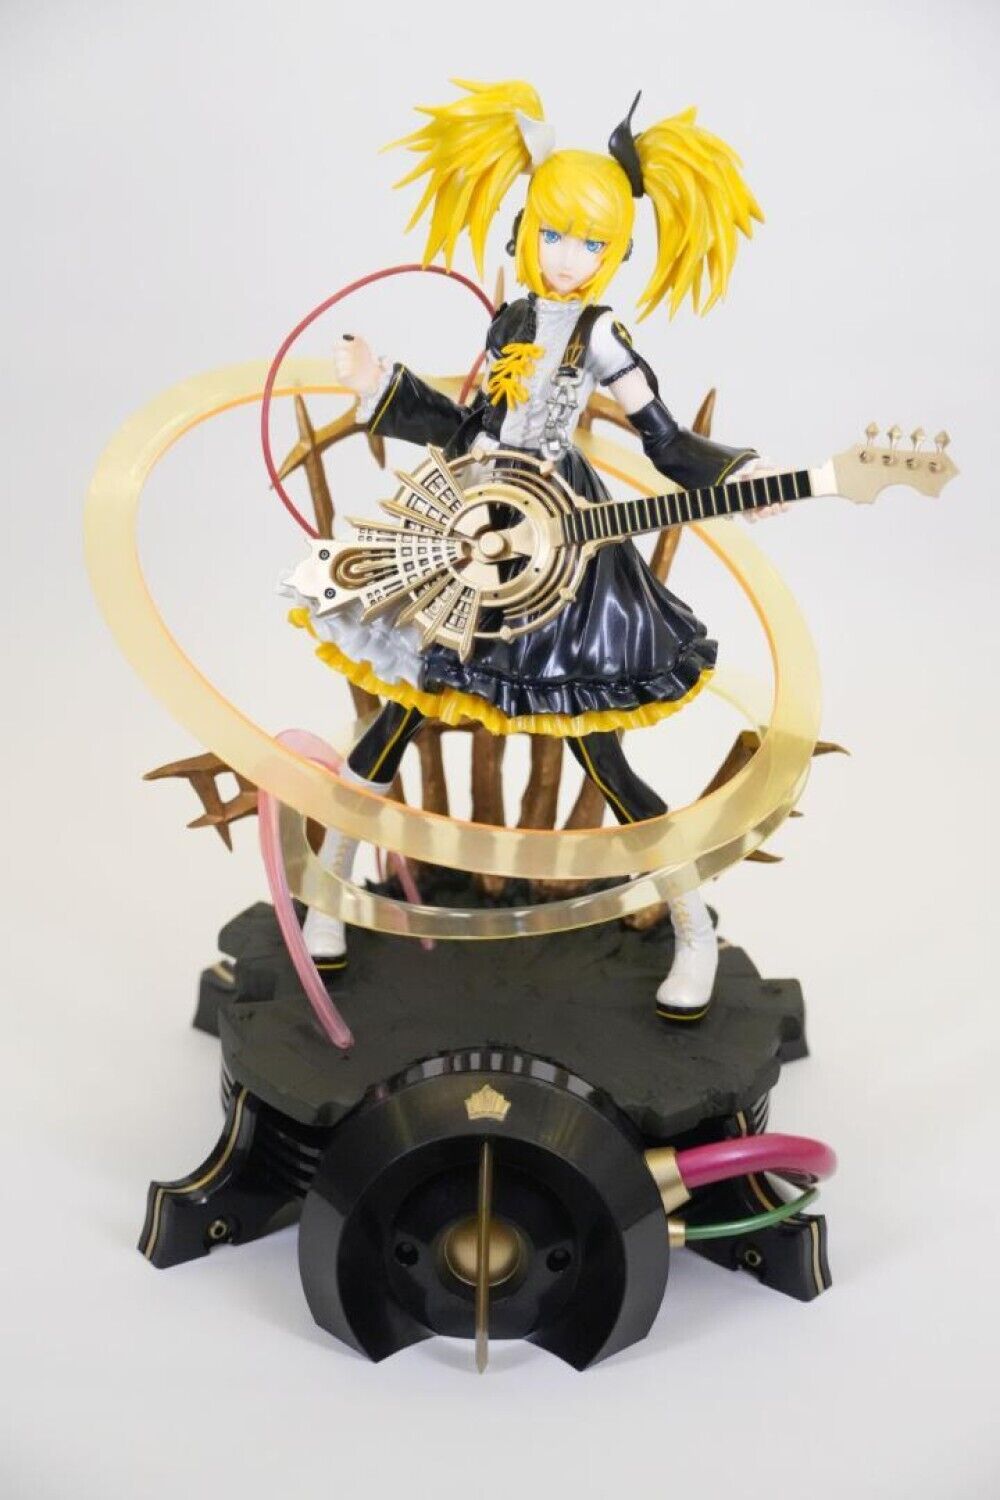 Max Factory Rin Kagamine Figure Vocaloid Meltdown 1/8 Scale Japan 2010 Exce++